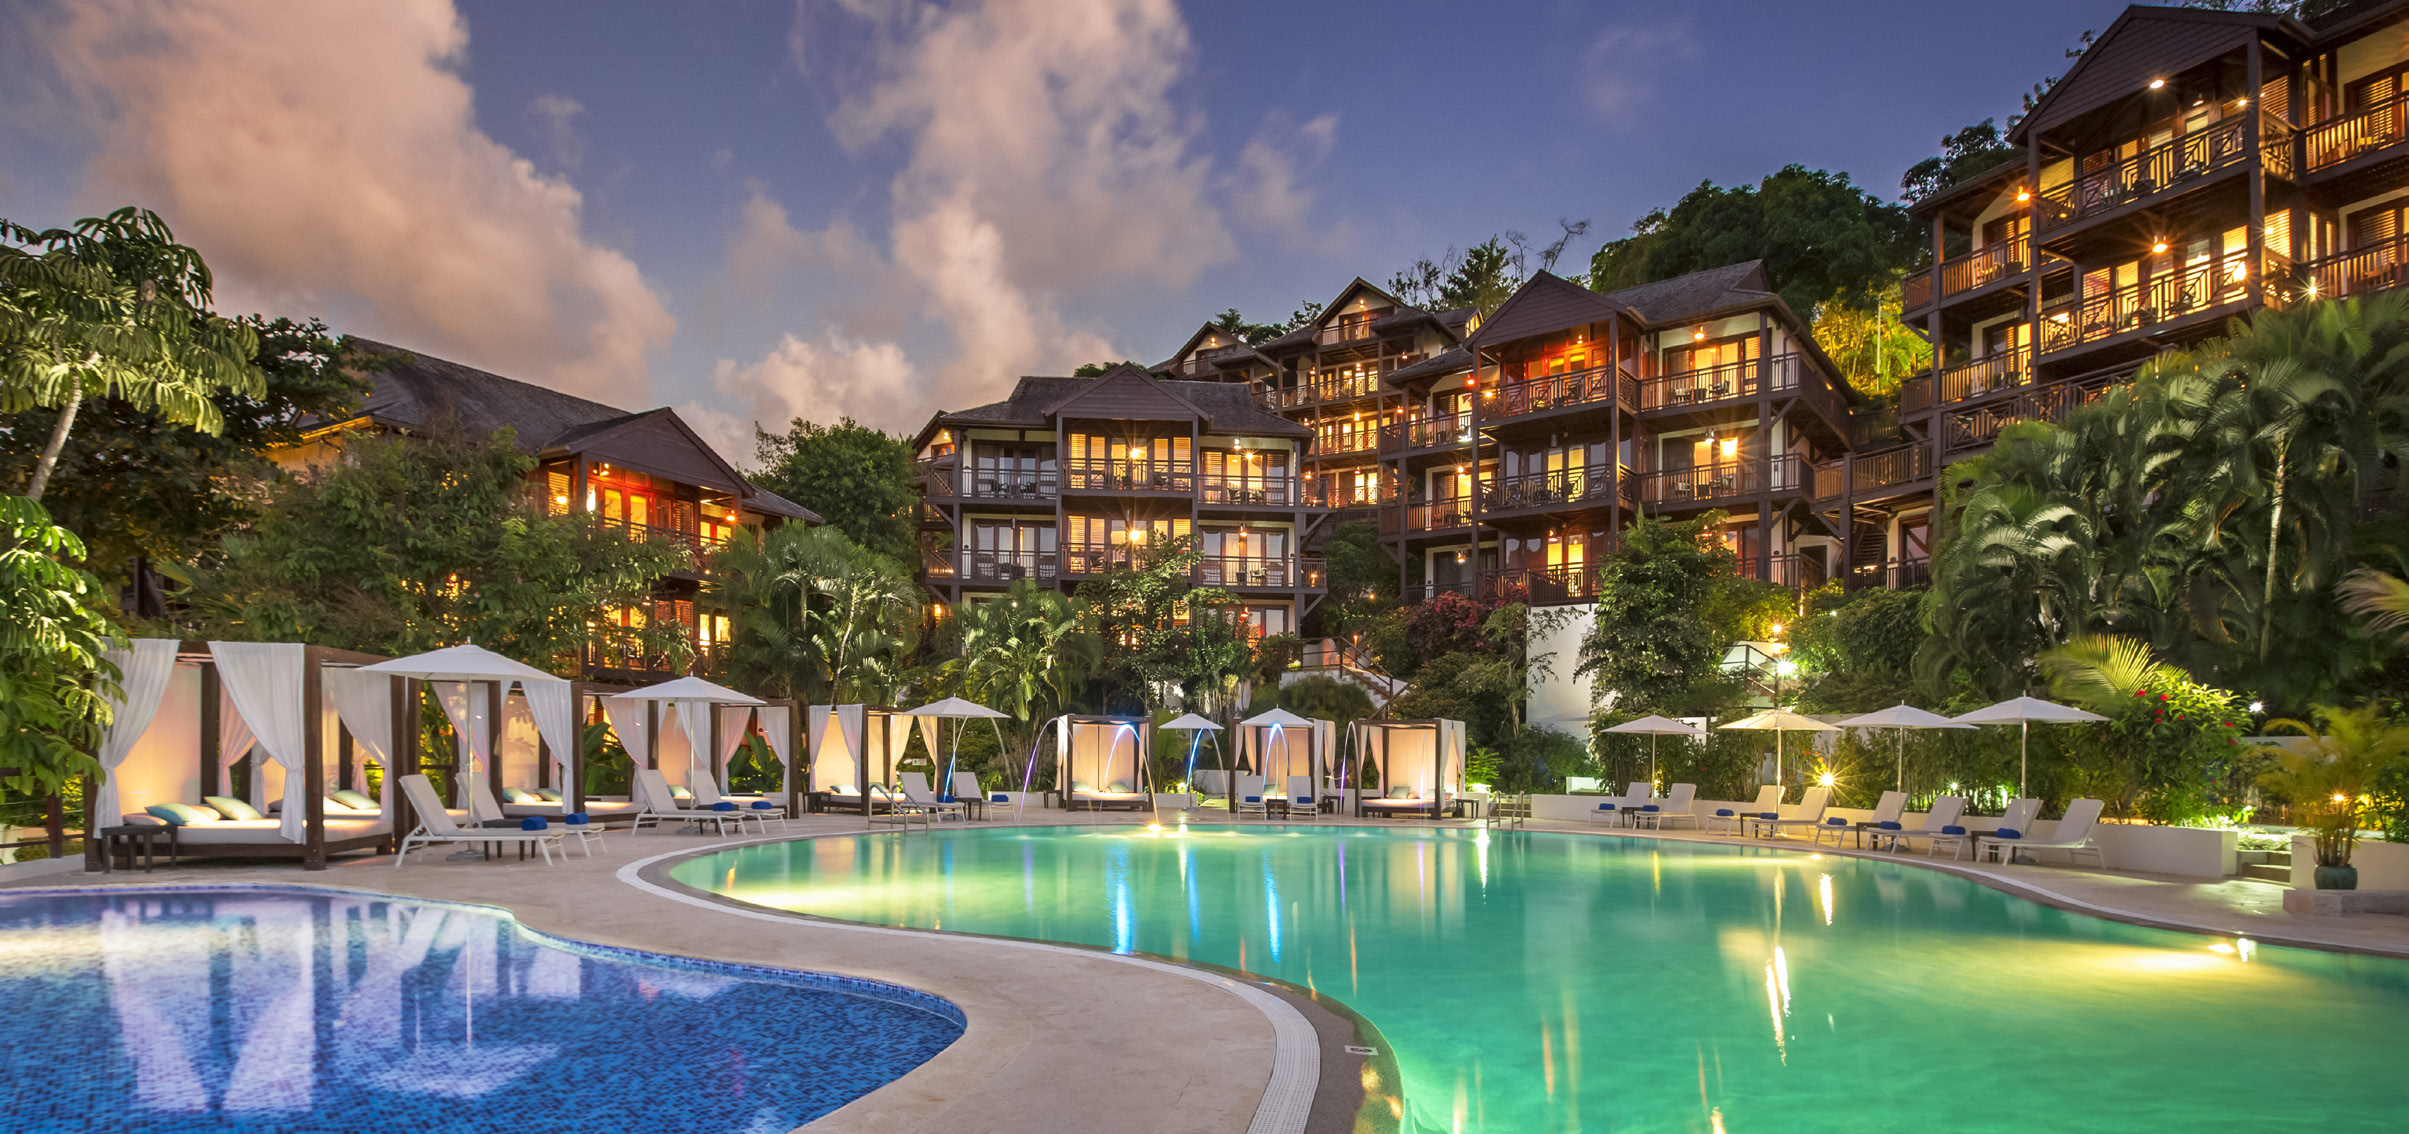 Book Your Stay at Zoetry Marigot Bay Now